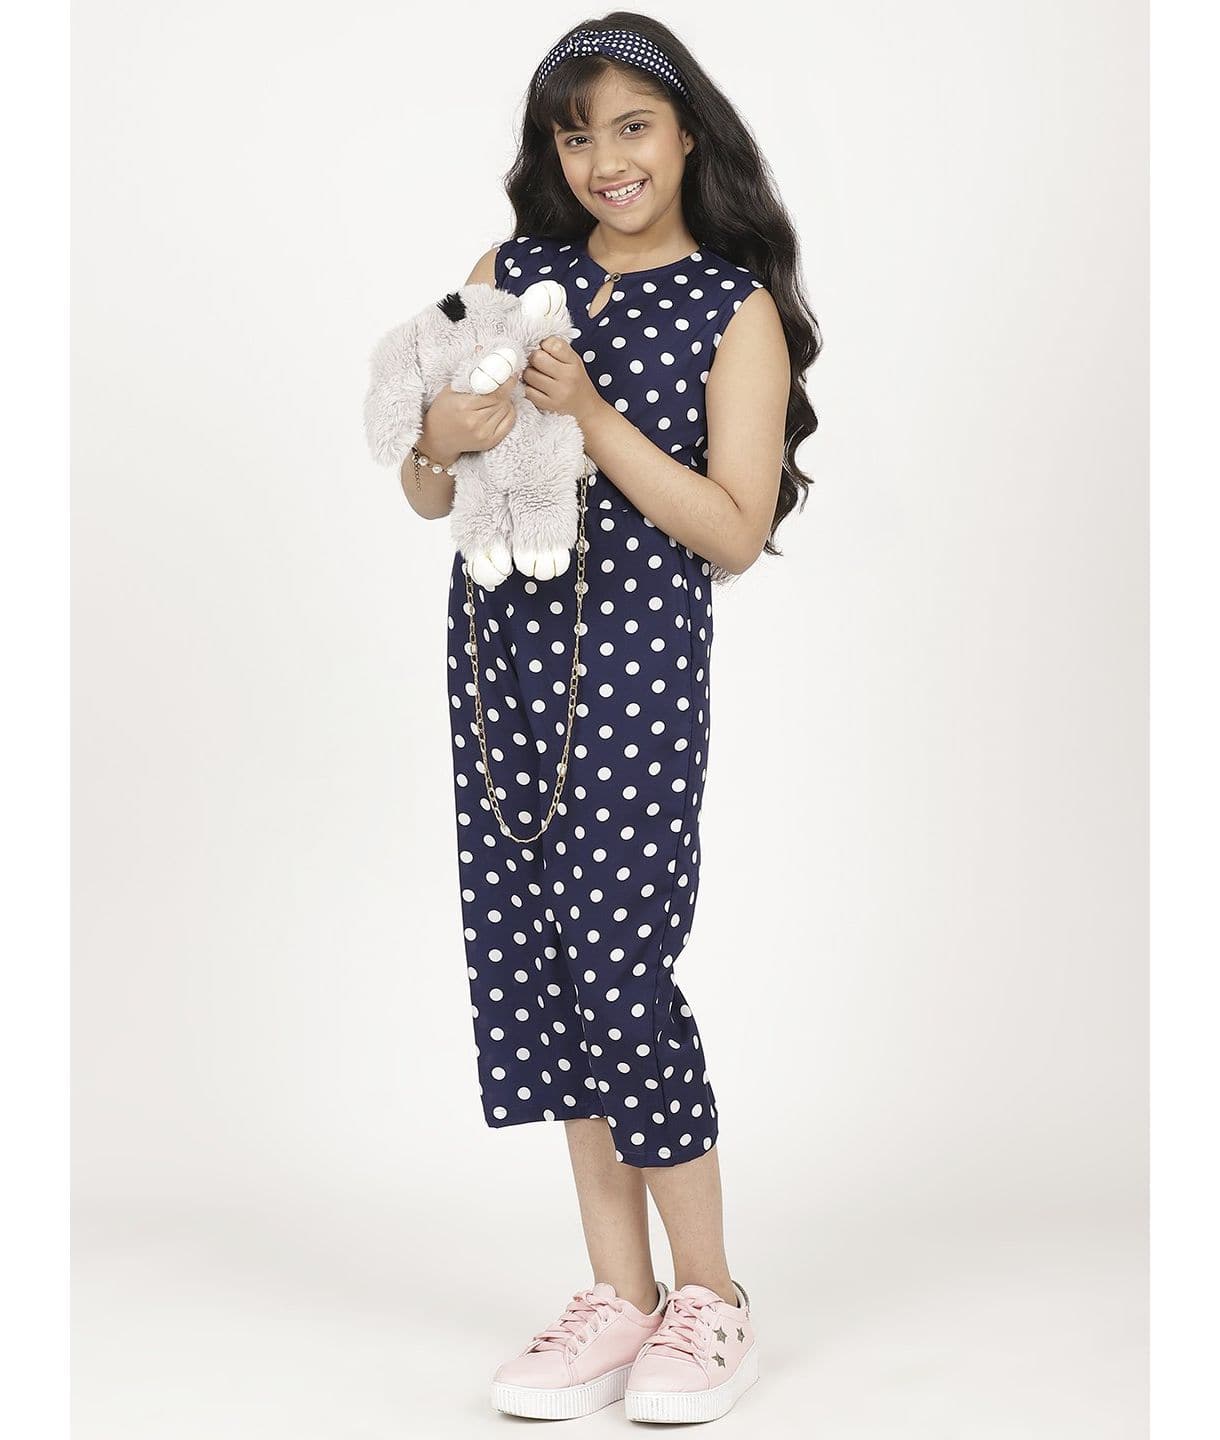 Elasticated Key-hole Jumpsuit for Girls - Uptownie